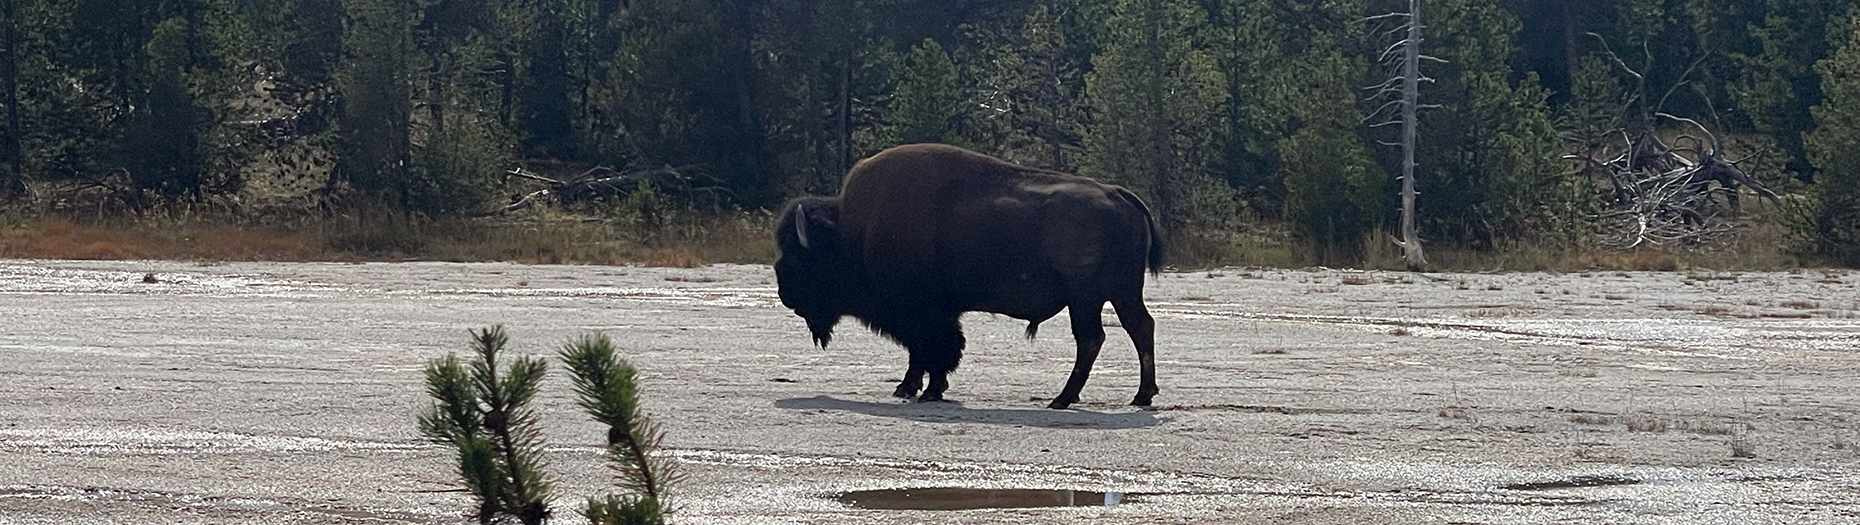 a bison or a buffalo?